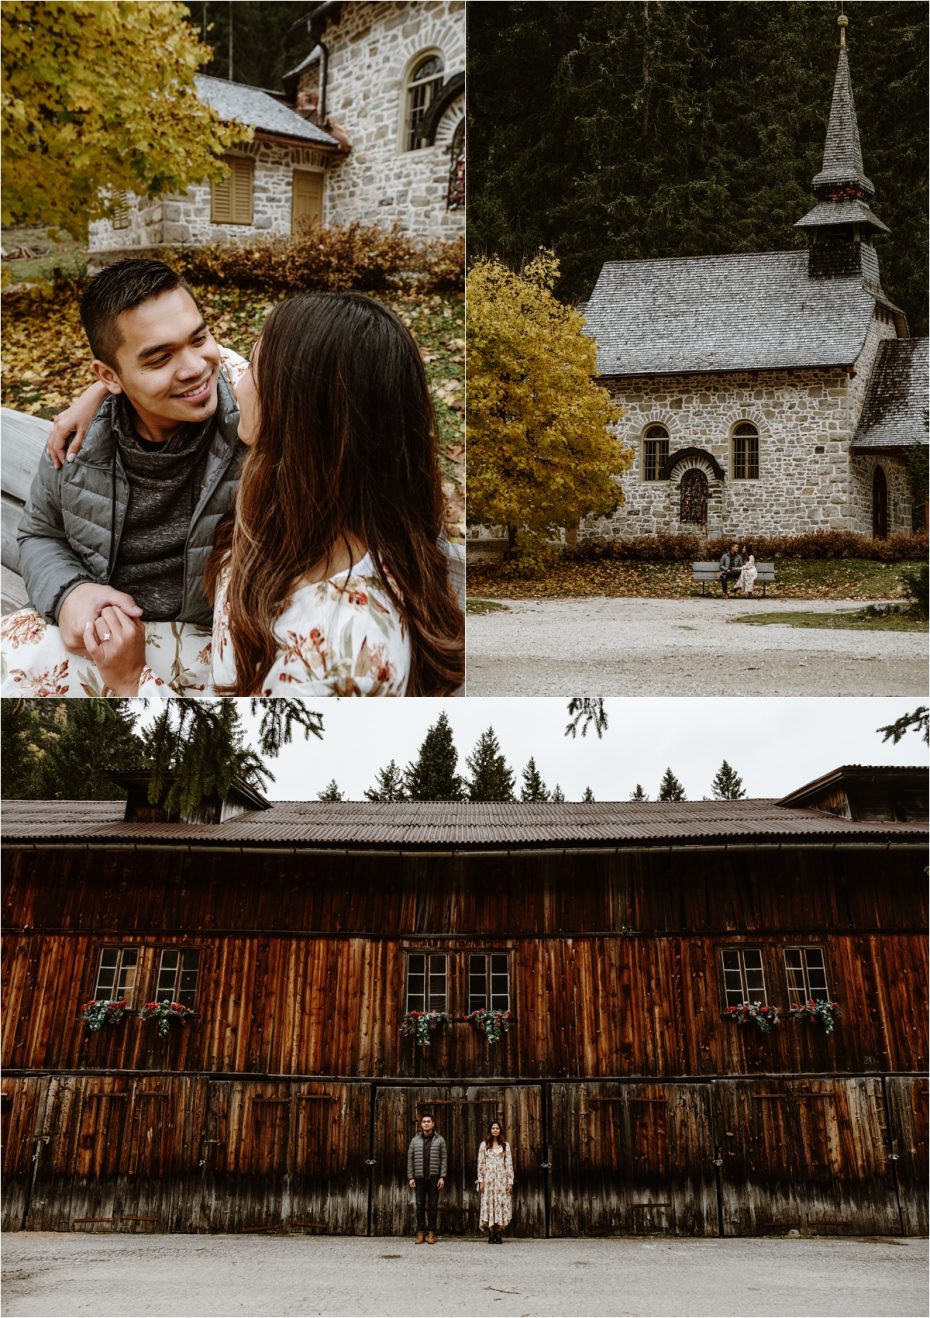 Engagement photos at Pragser Wildsee. Photos by Wild Connections Photography.